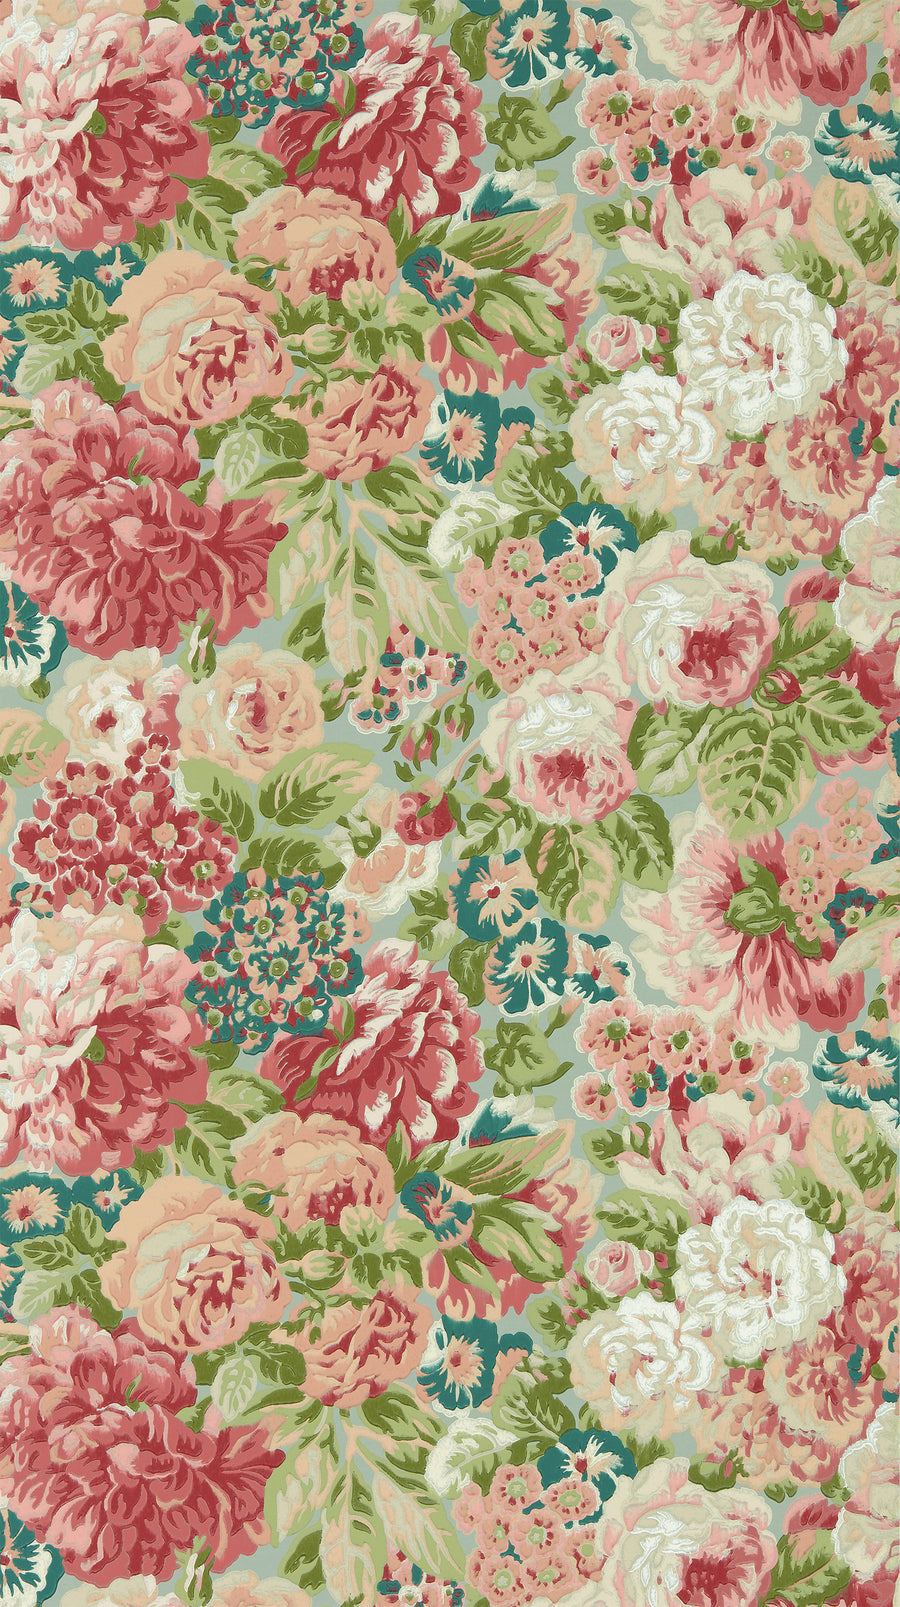 Sanderson / ONE SIXTY WALLPAPER COLLECTION / Rose And Peony Blue Clay / Carmen Lt 217029